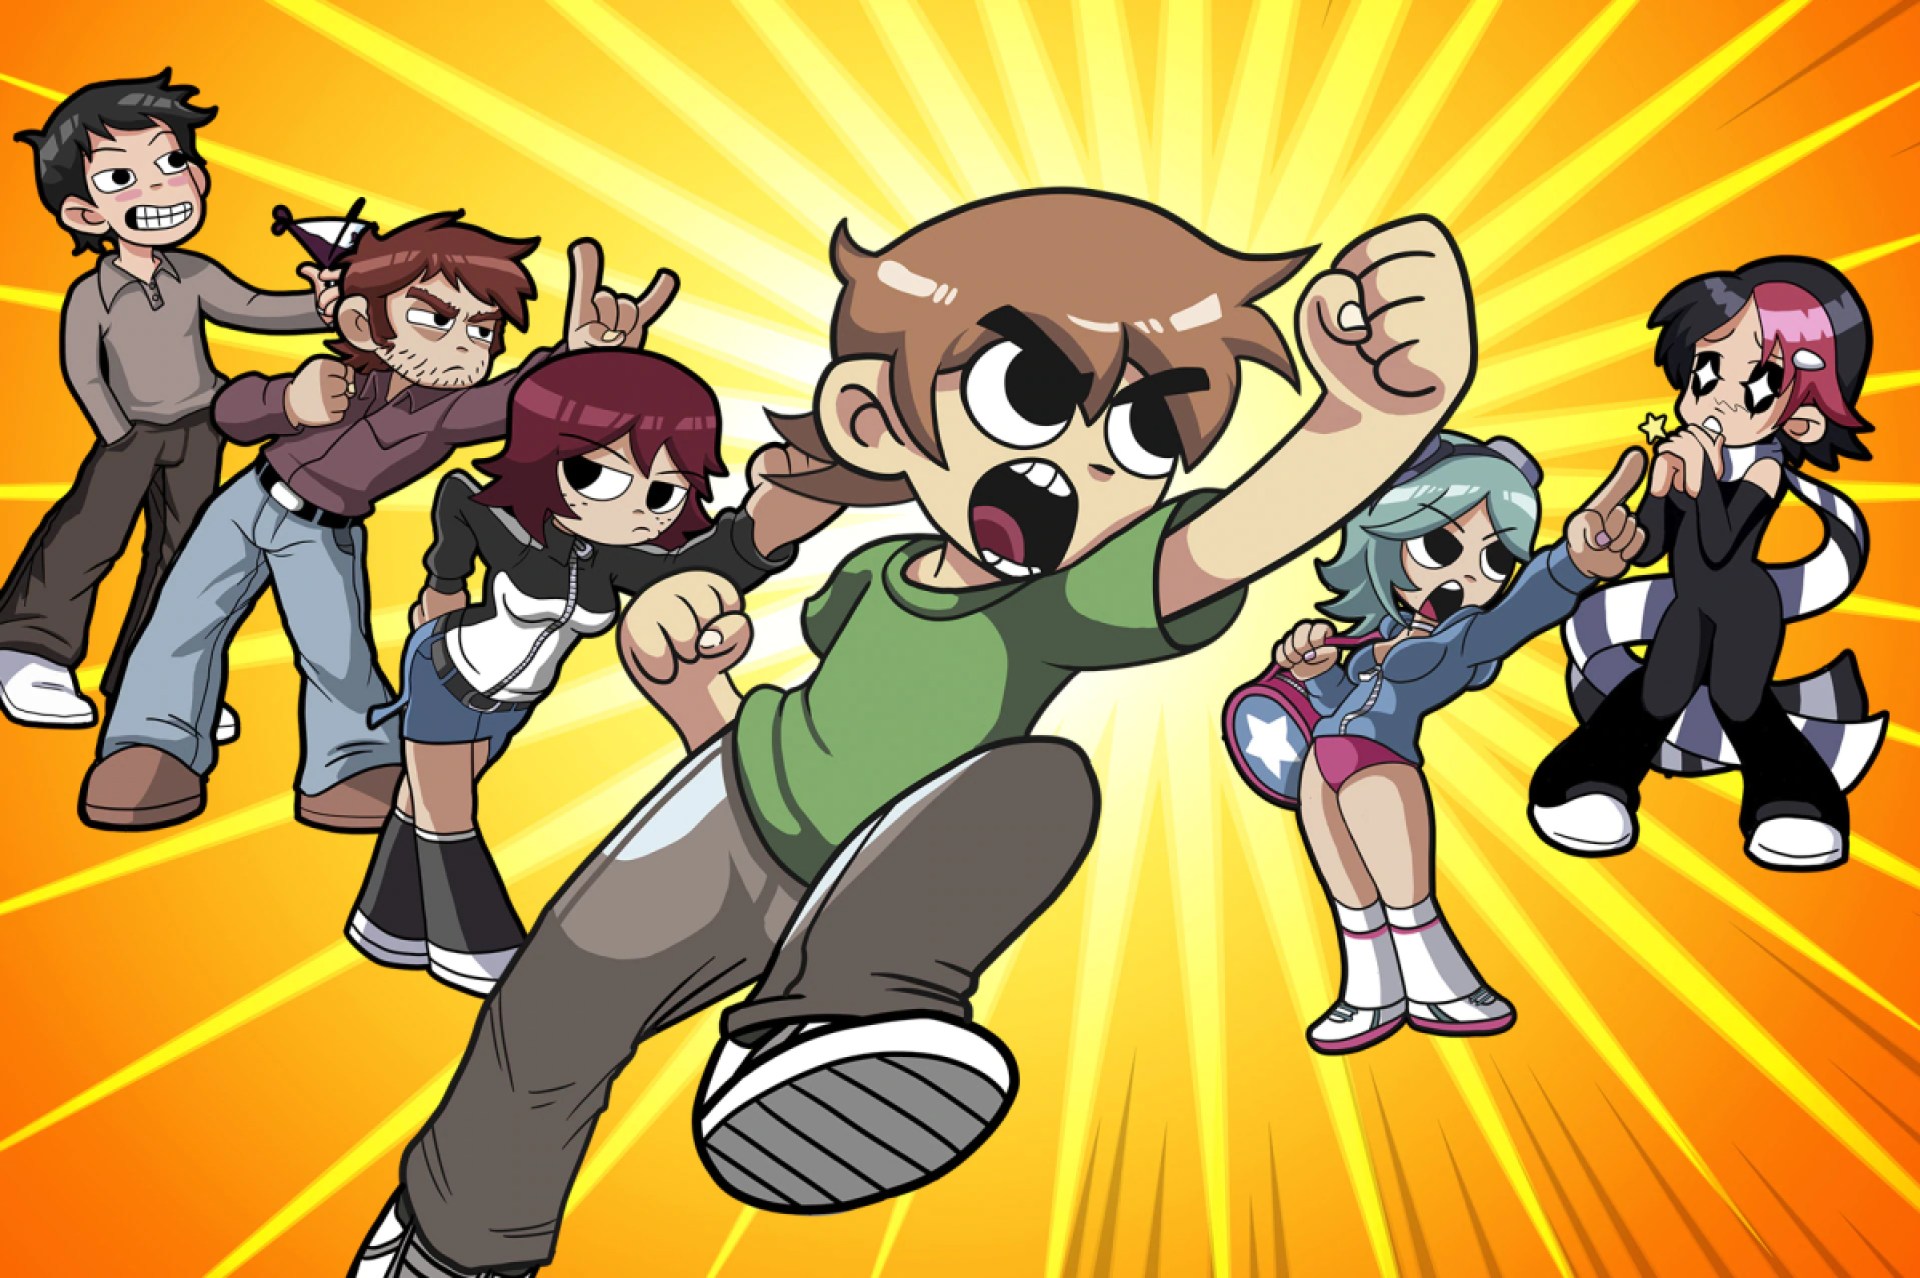 Animated characters pose ready to fight, with a sunburst behind them in the game "Scott Pilgrim vs. The World"